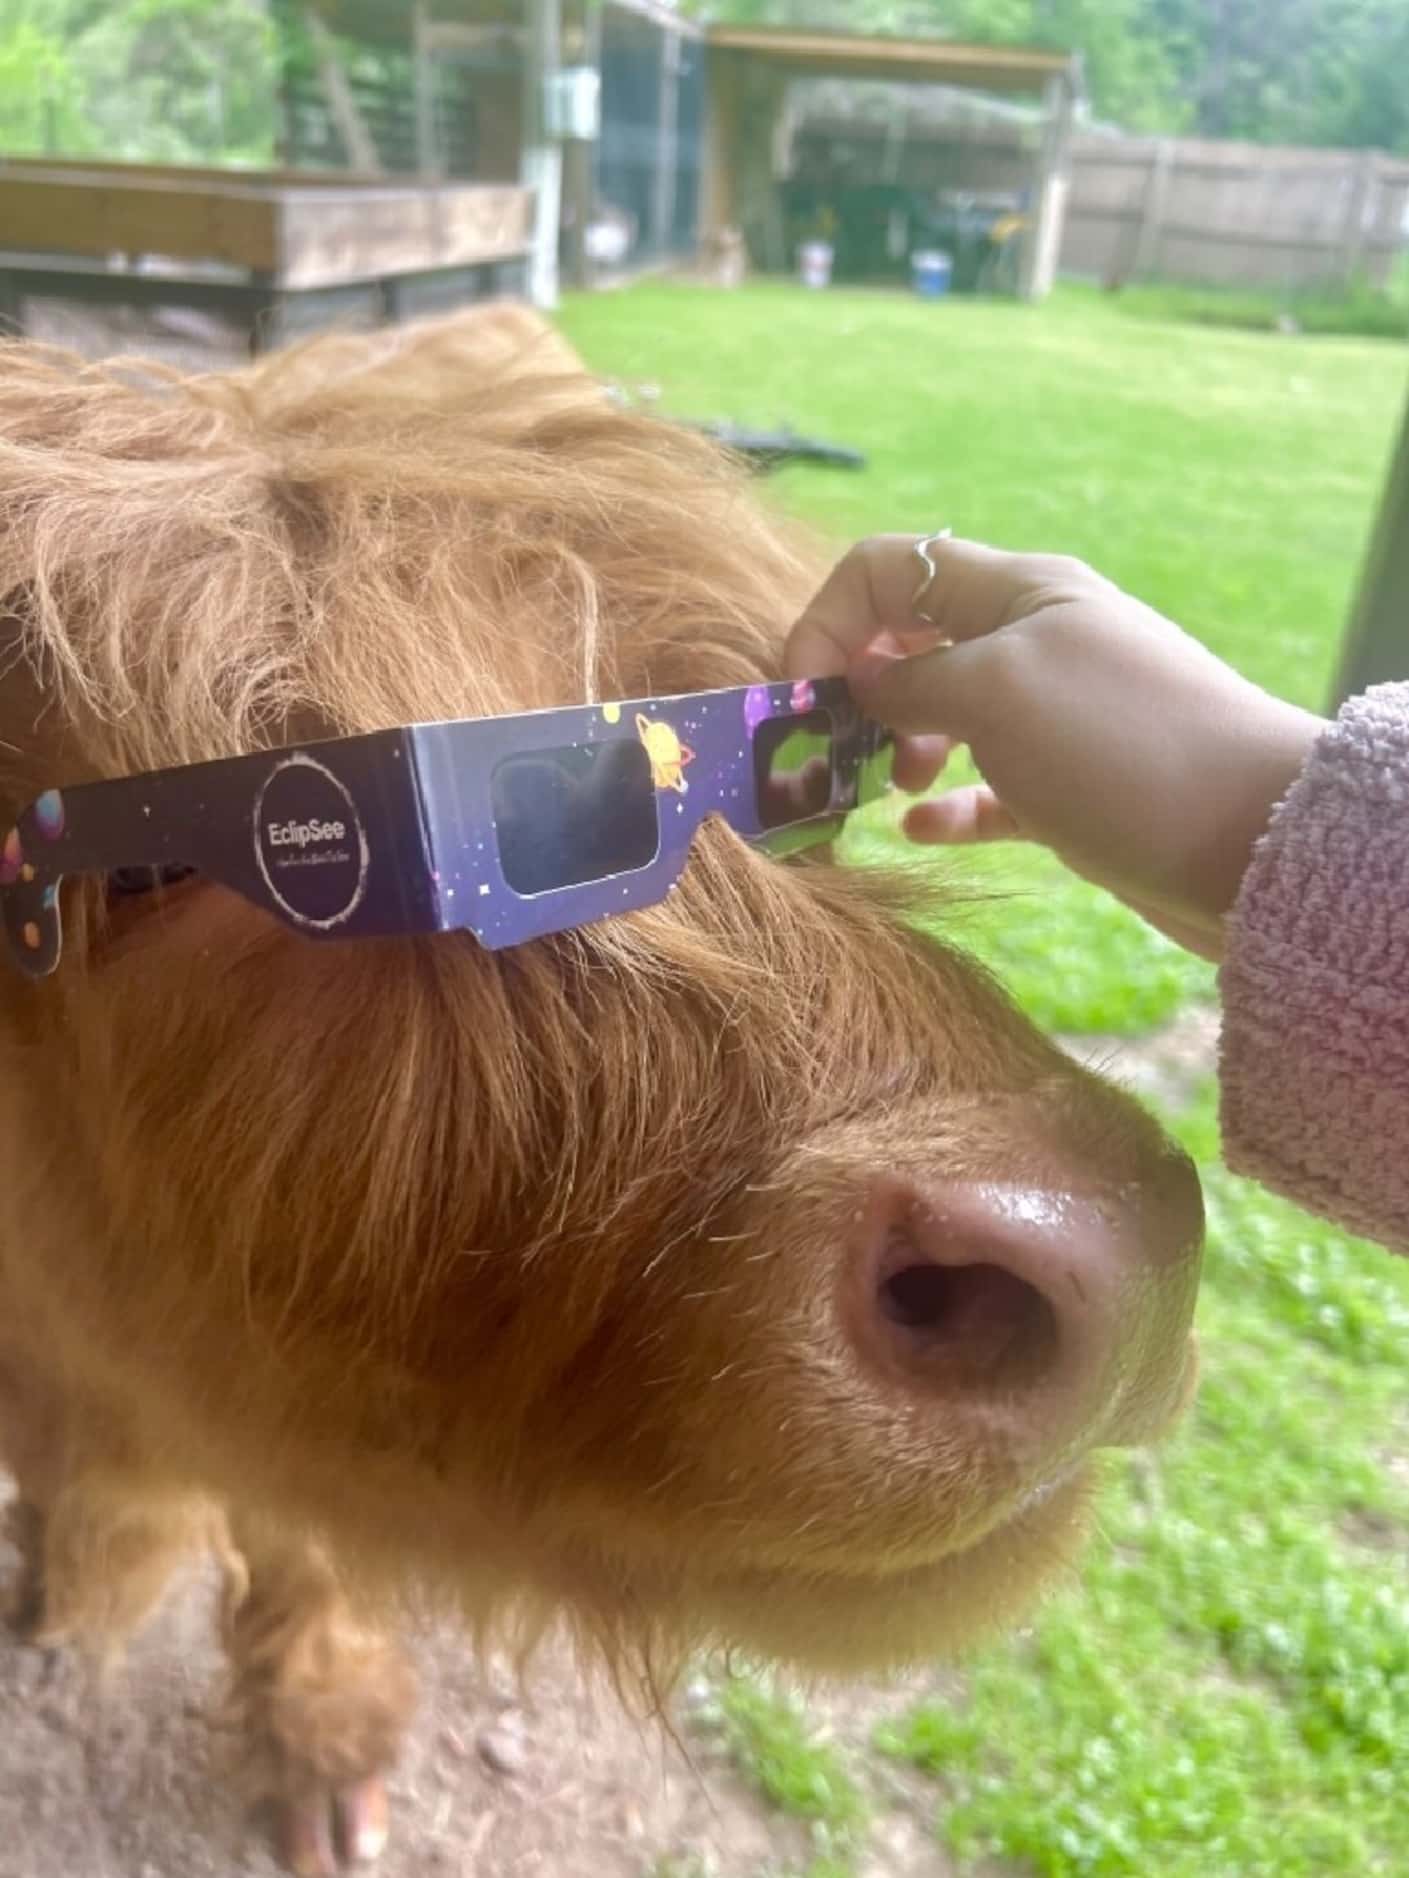 Eclipse glasses are placed on an animal in Dallas, Texas. Provided by Noely Cortes